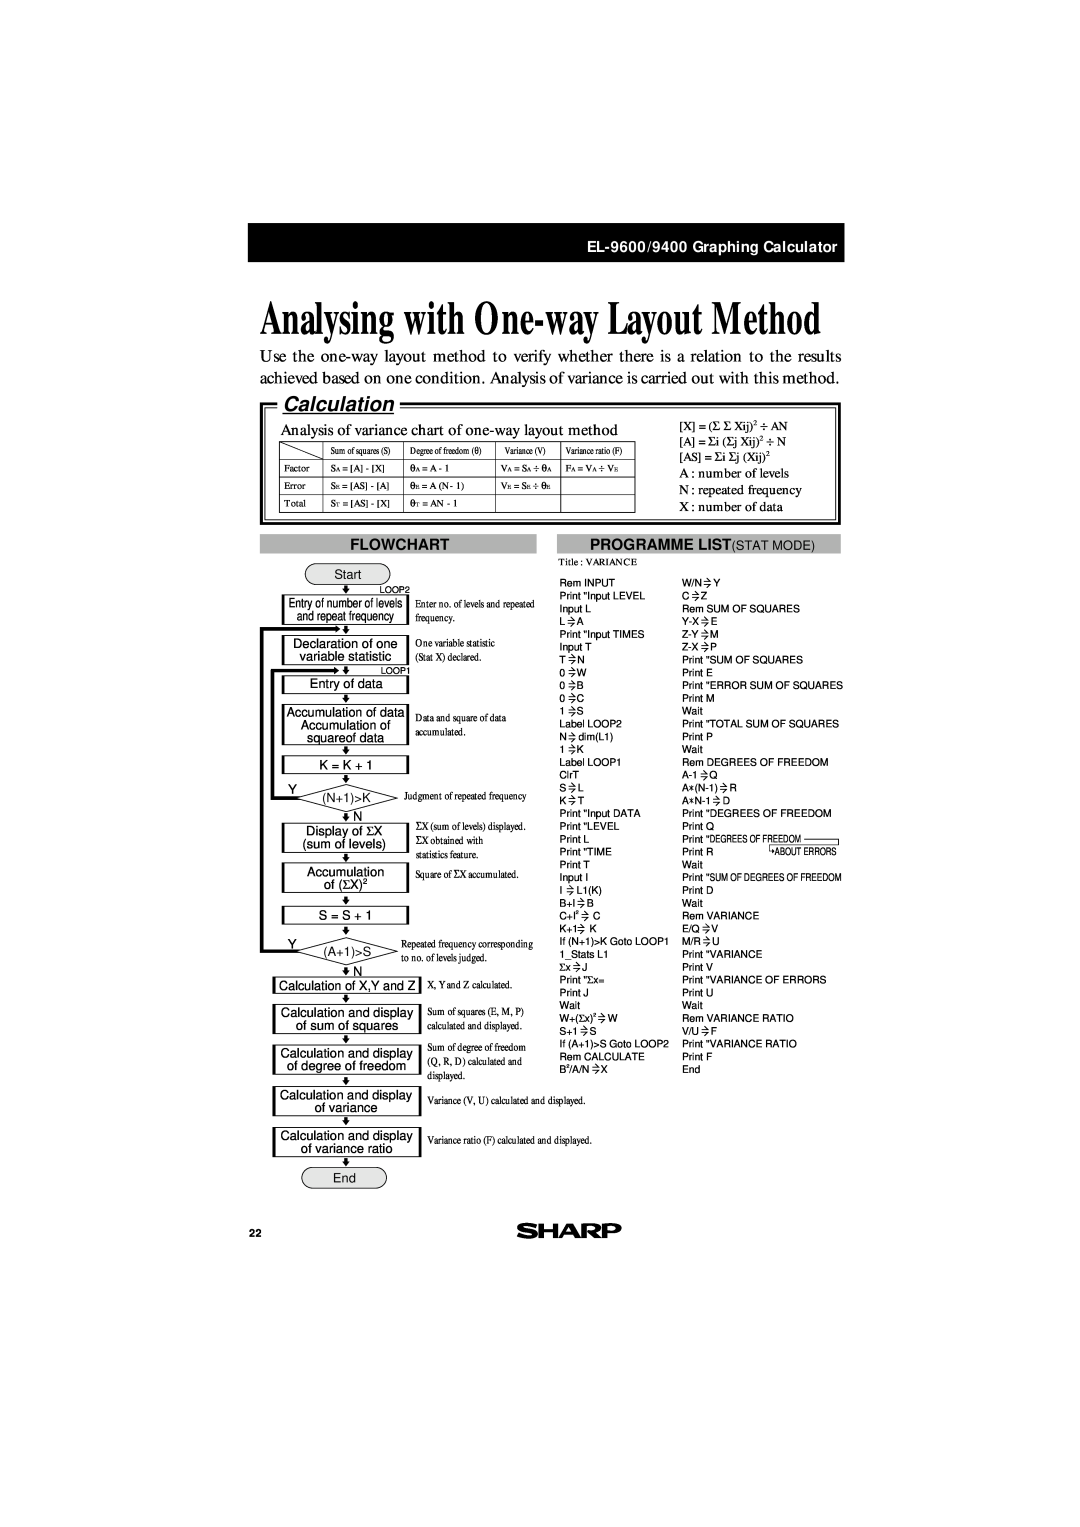 Sharp EL-9600 manual Analysing with One-way Layout Method, Analysis of variance chart of one-way layout method, Calculation 